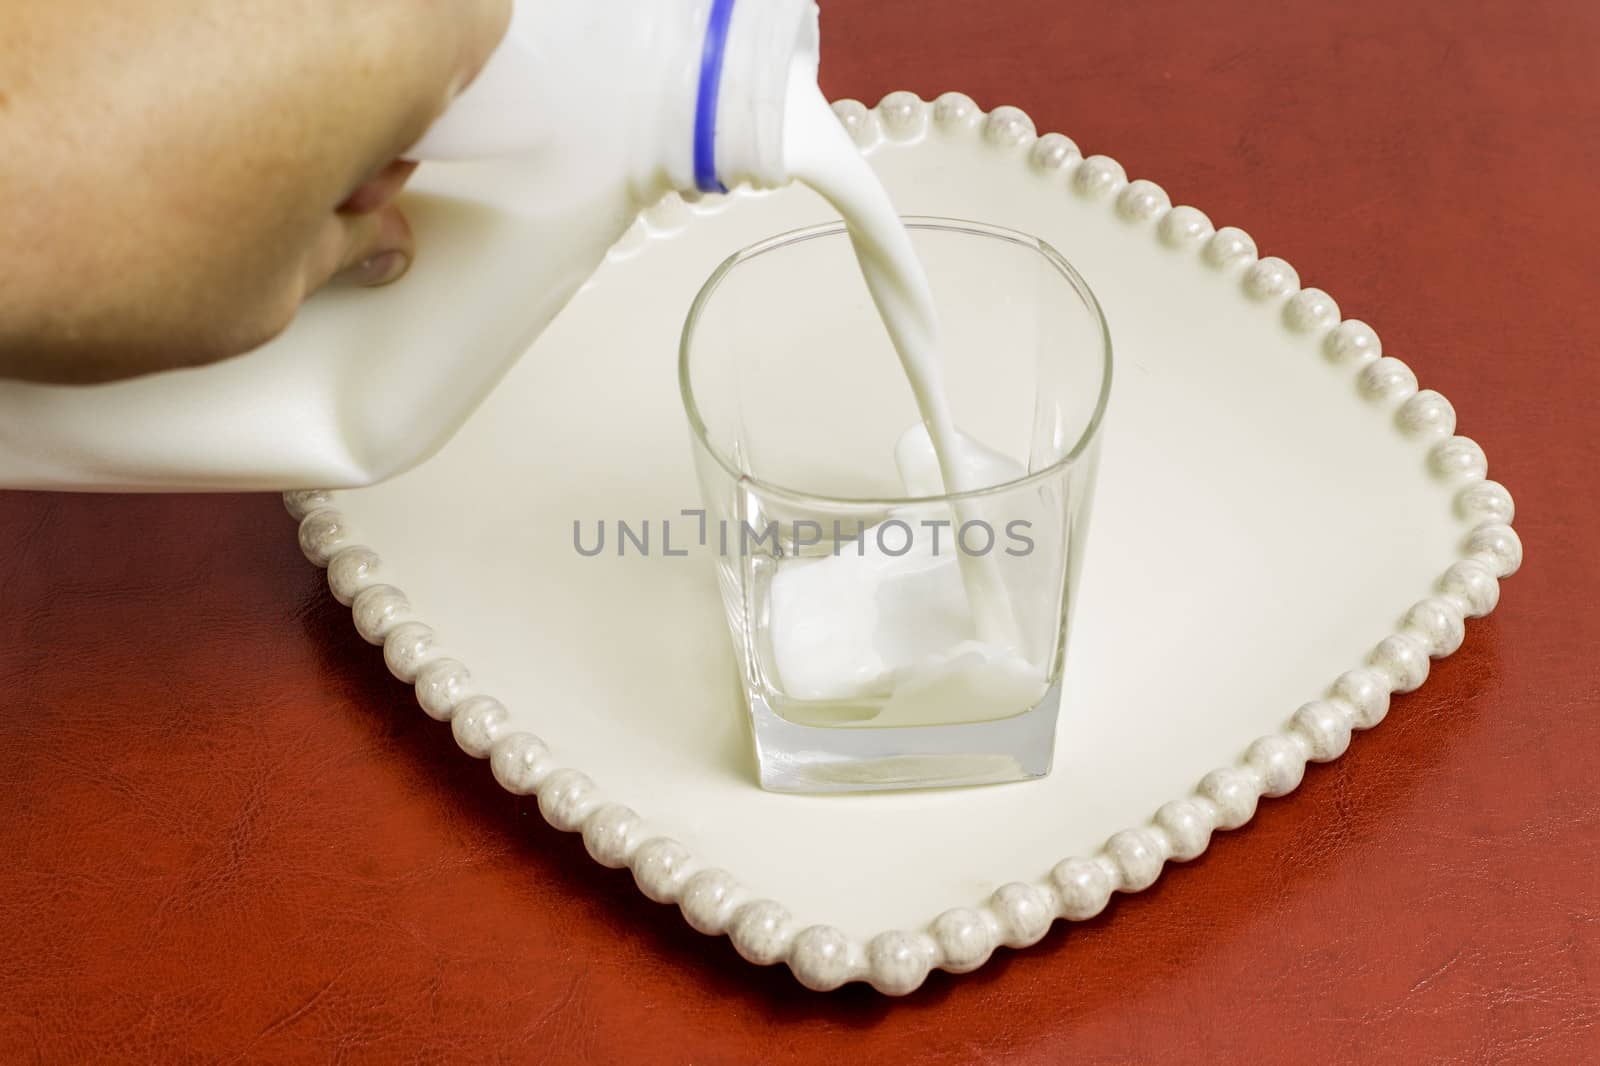 A glass sitting on a plate with milk from a jug being poured.